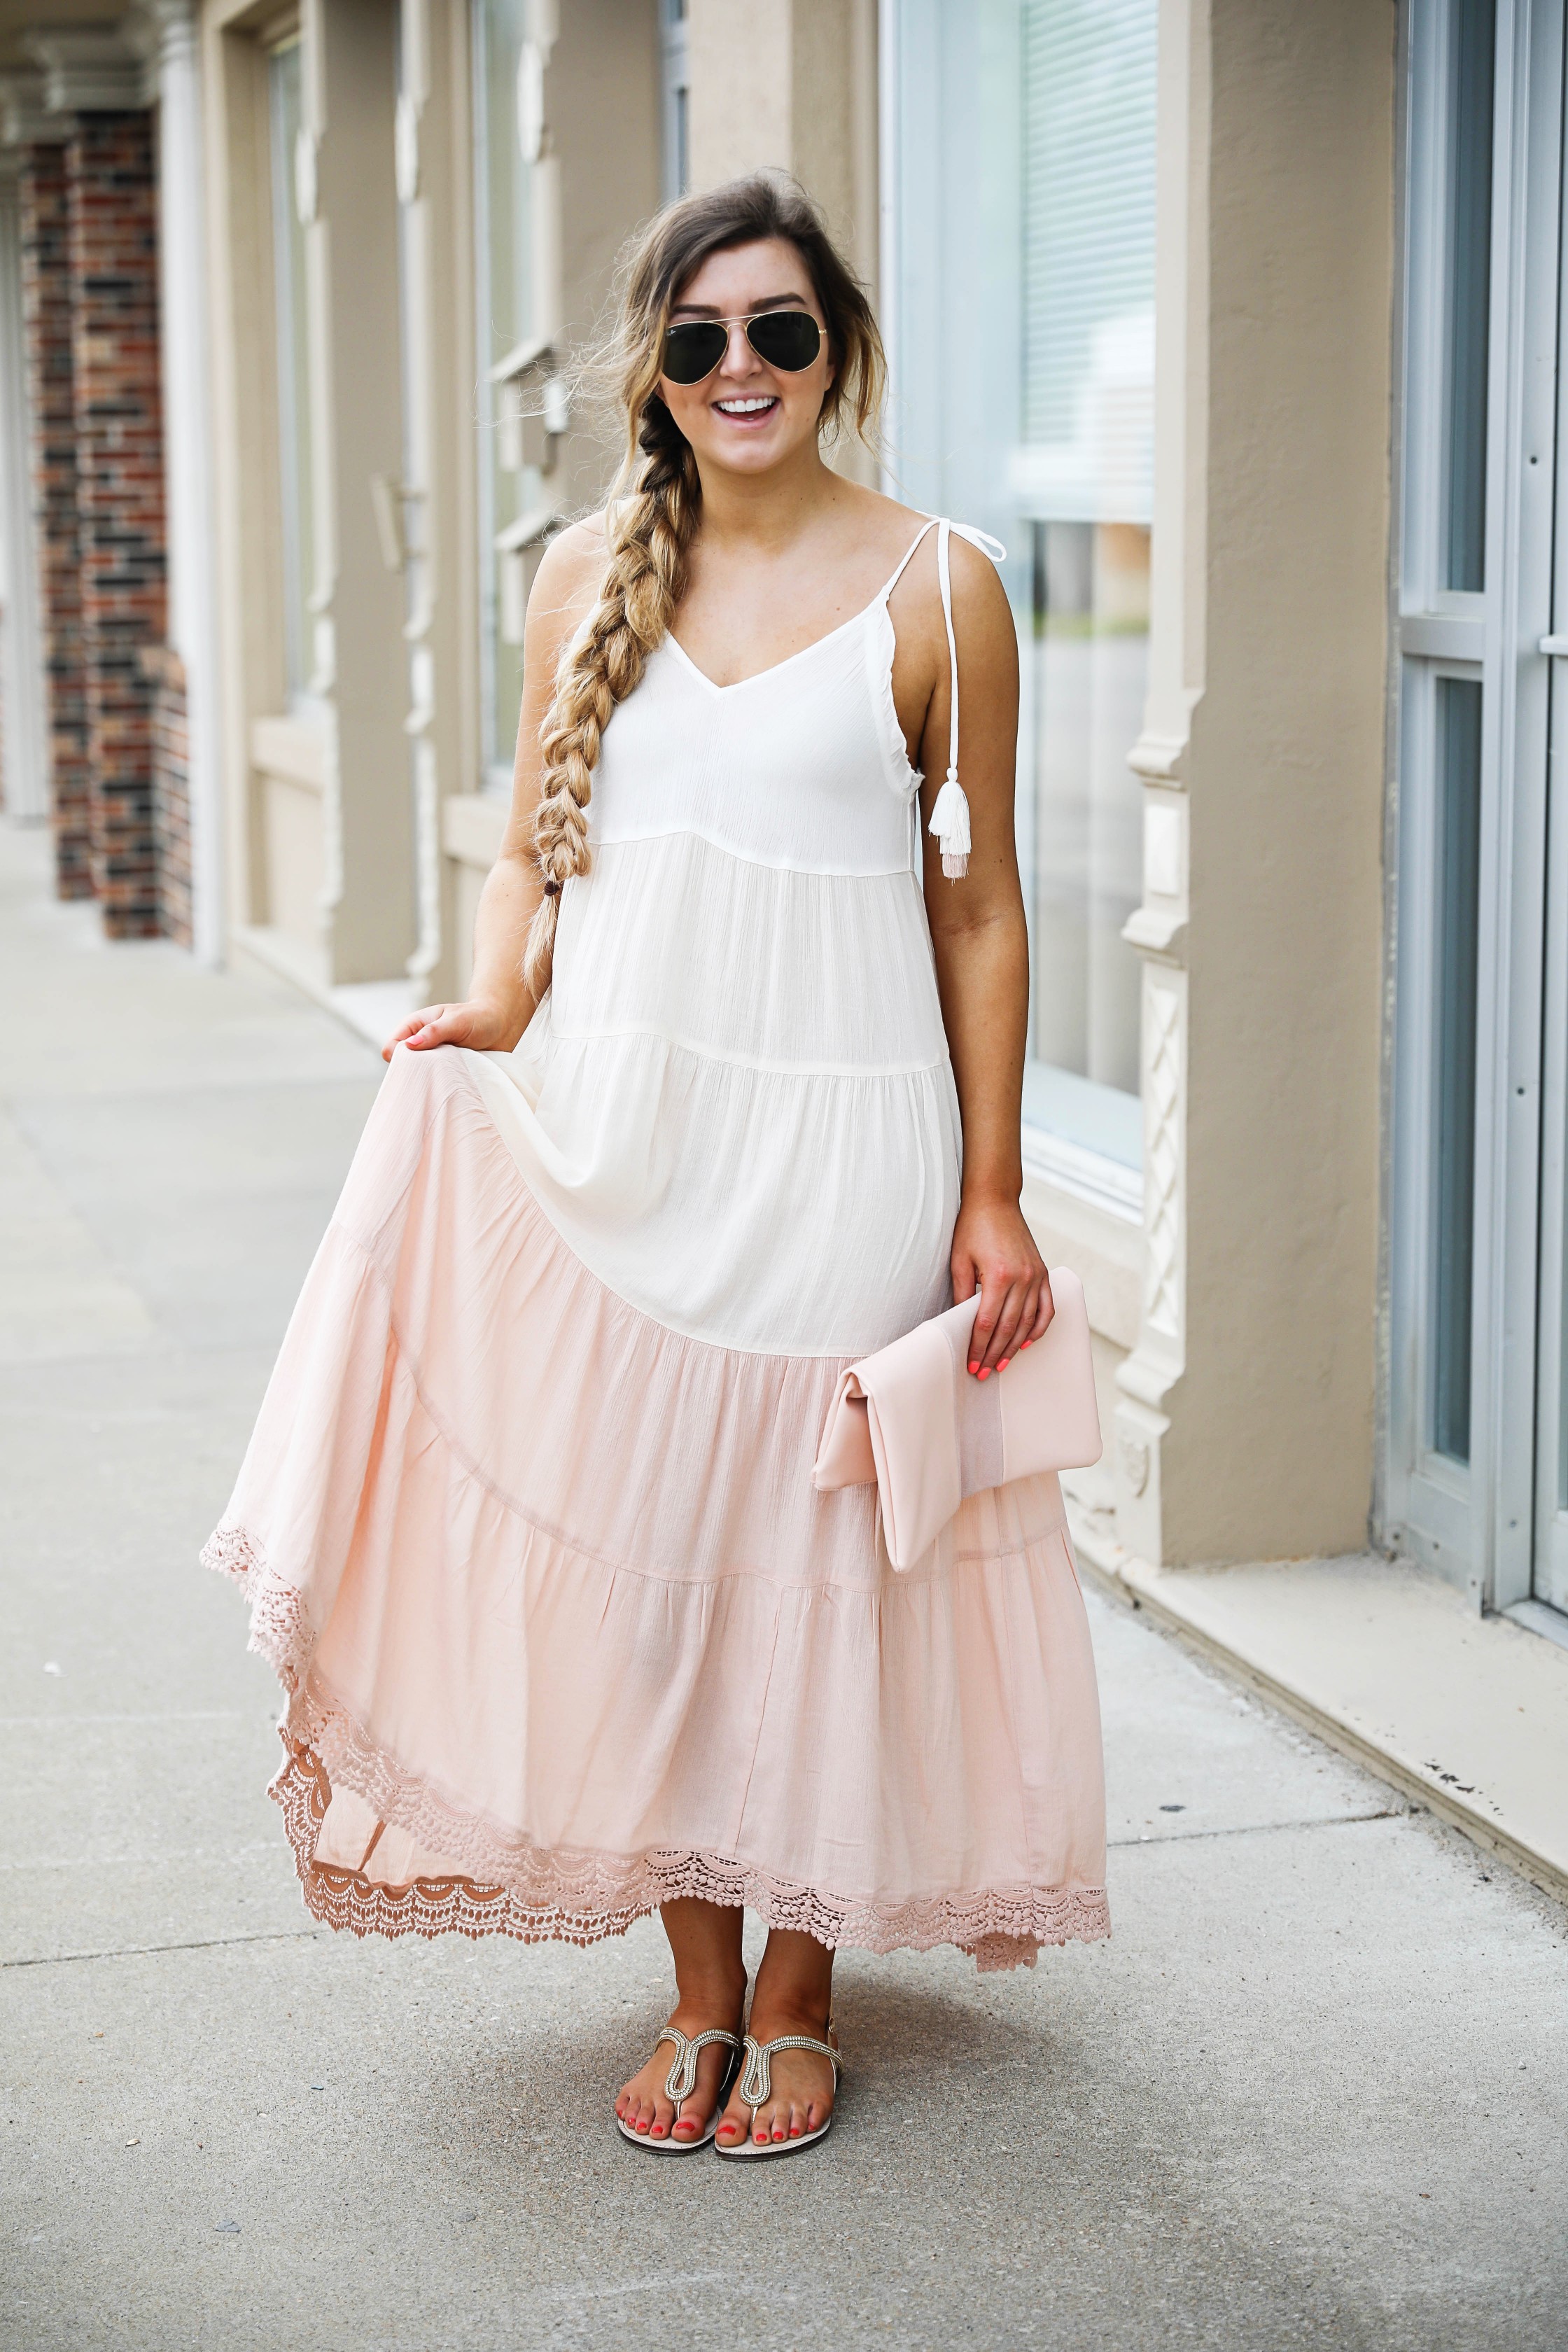 This pink and white color block dress is the perfect flowy beach dress for this spring and summer. Perfect spring outfit. By Lauren Lindmark on dailydoseofcharm.com daily dose of charm